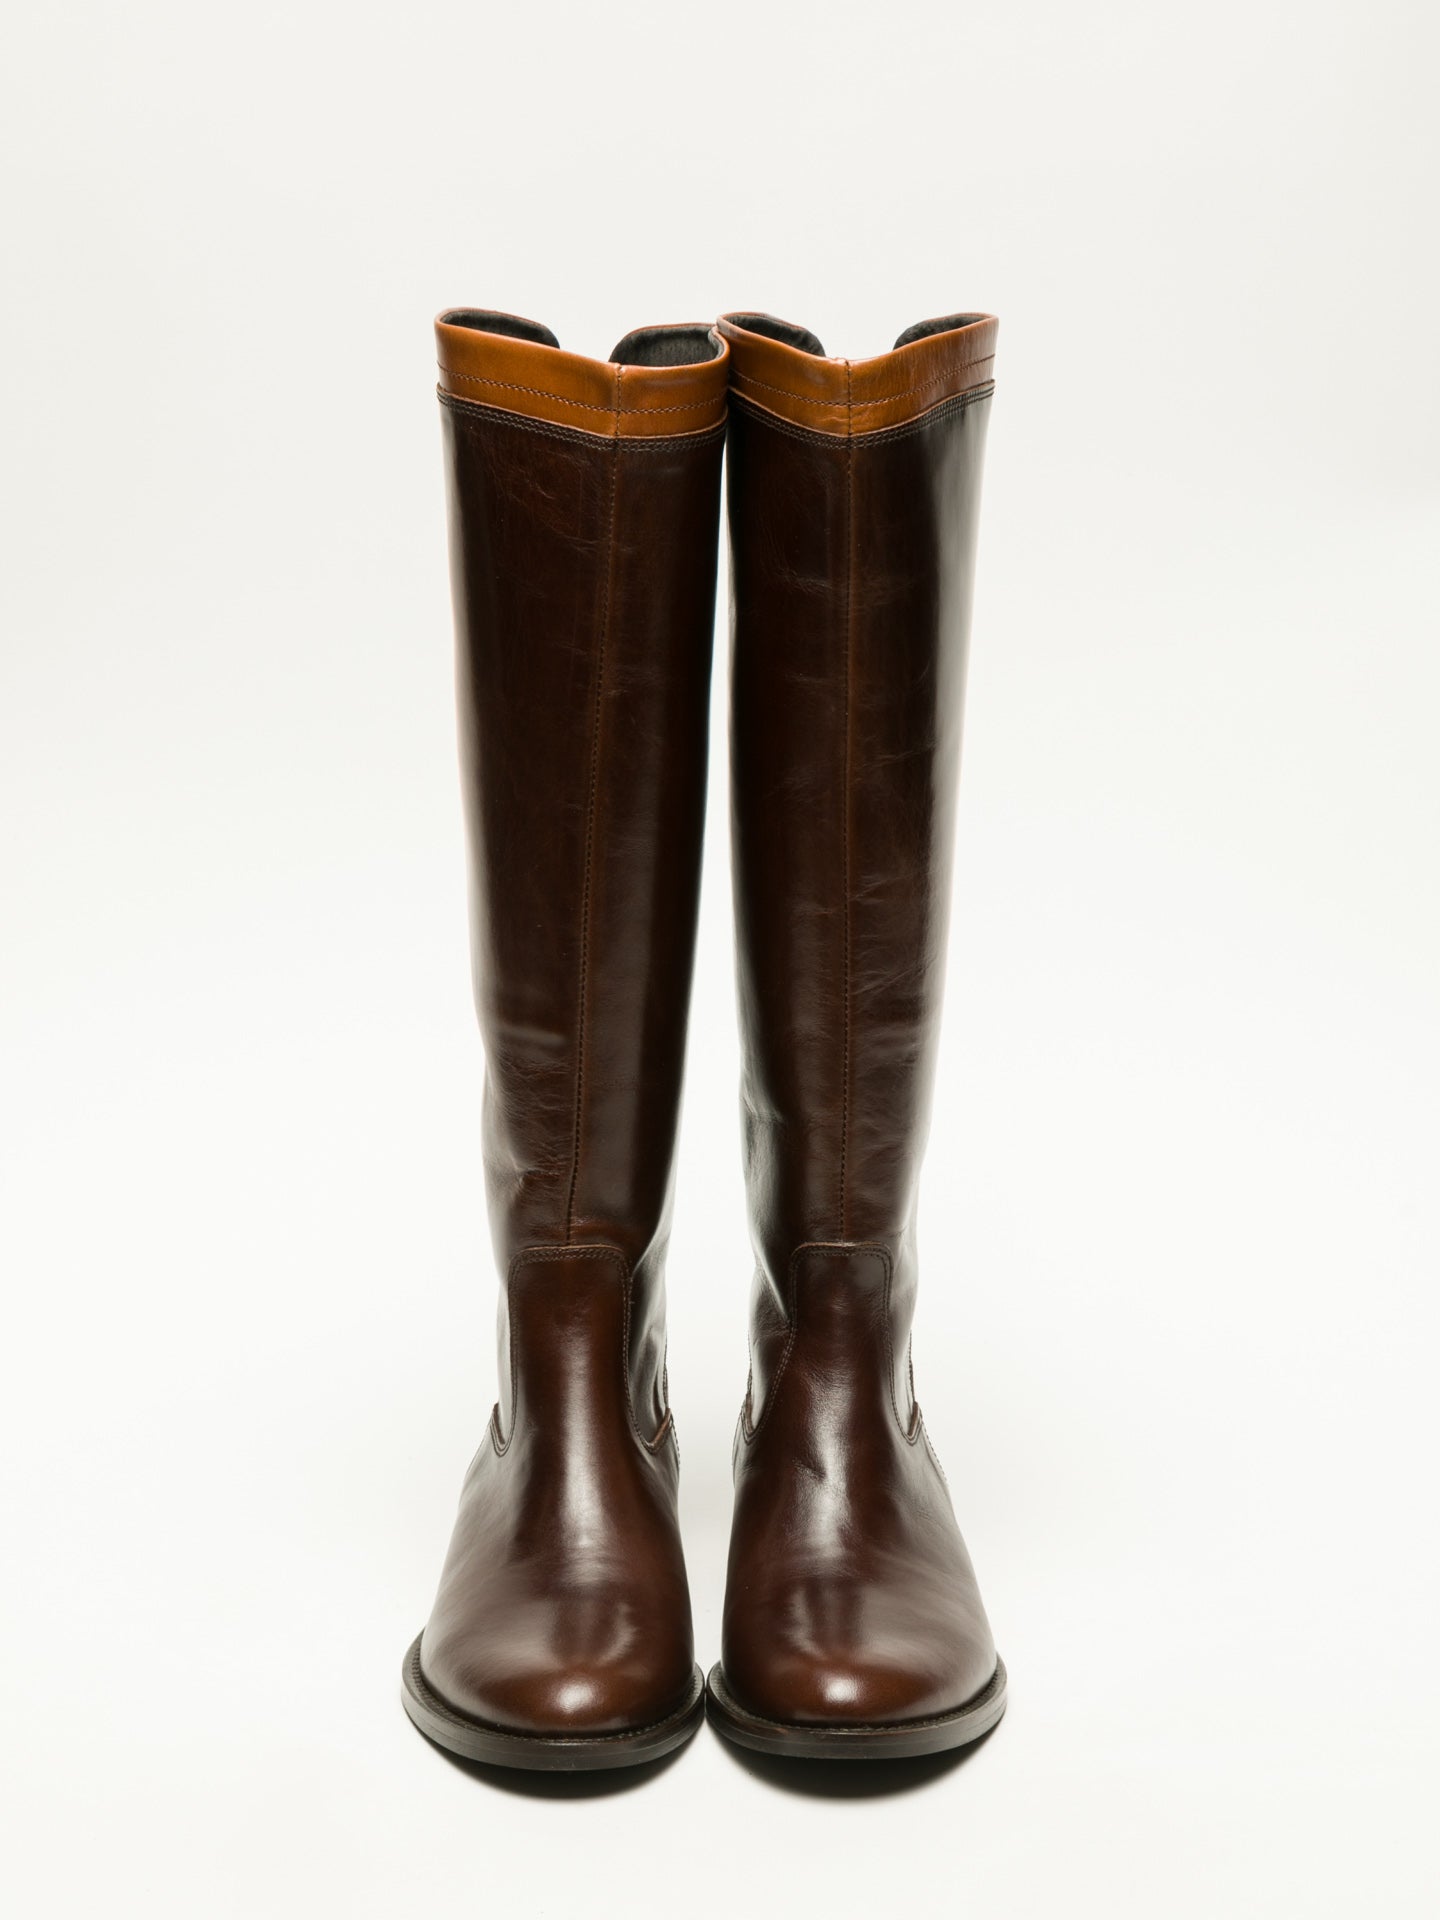 Foreva Brown Knee-High Boots